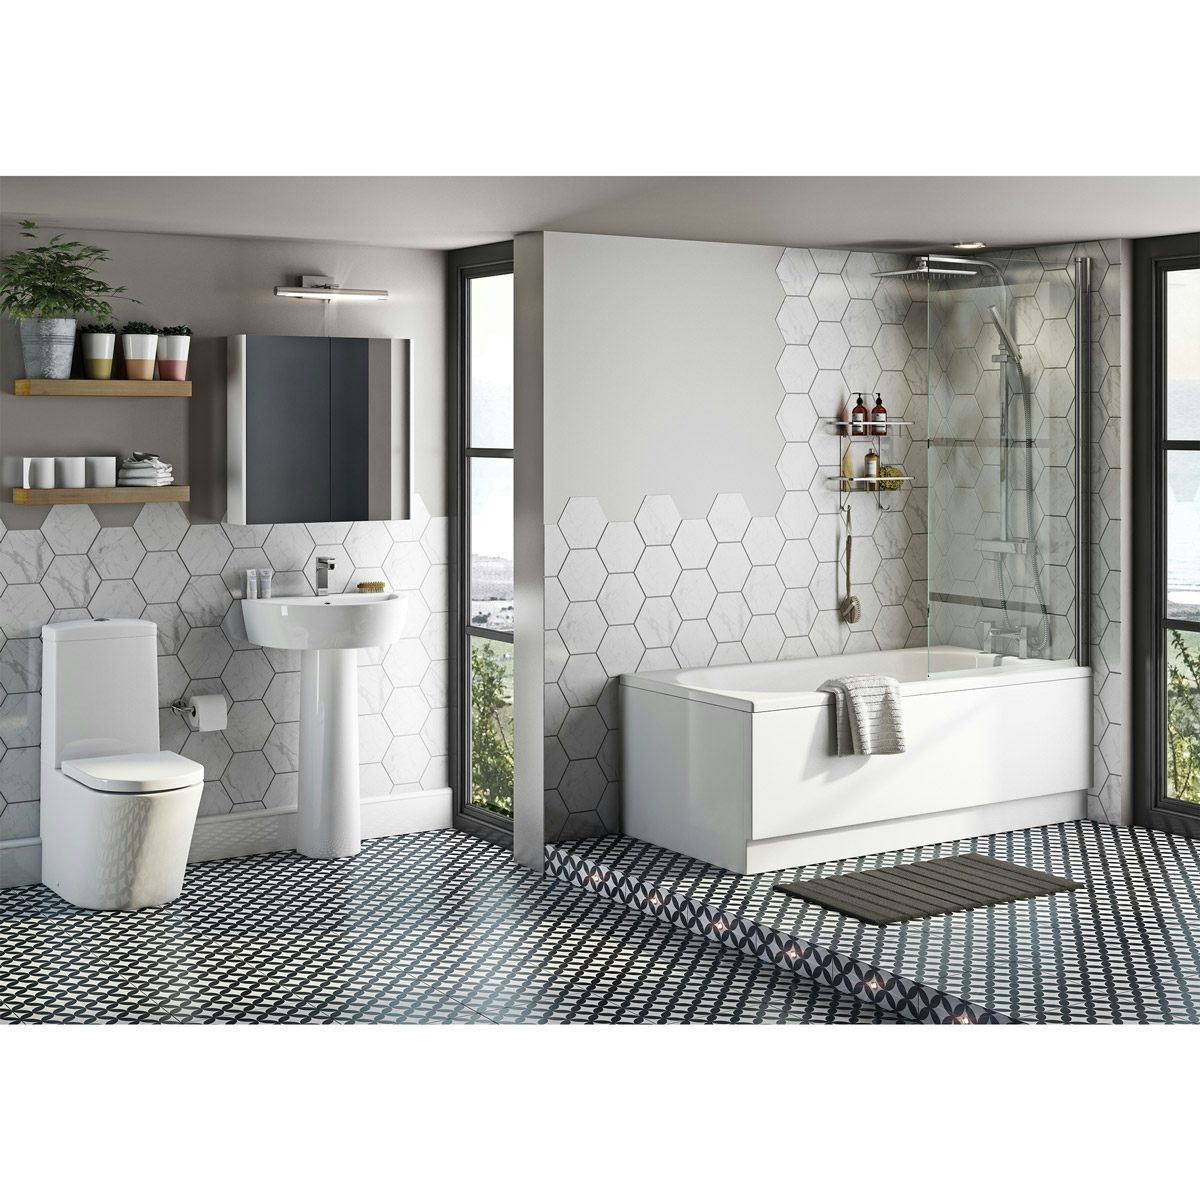 Mode Tate bathroom suite with straight bath, shower and taps 1700 x 700